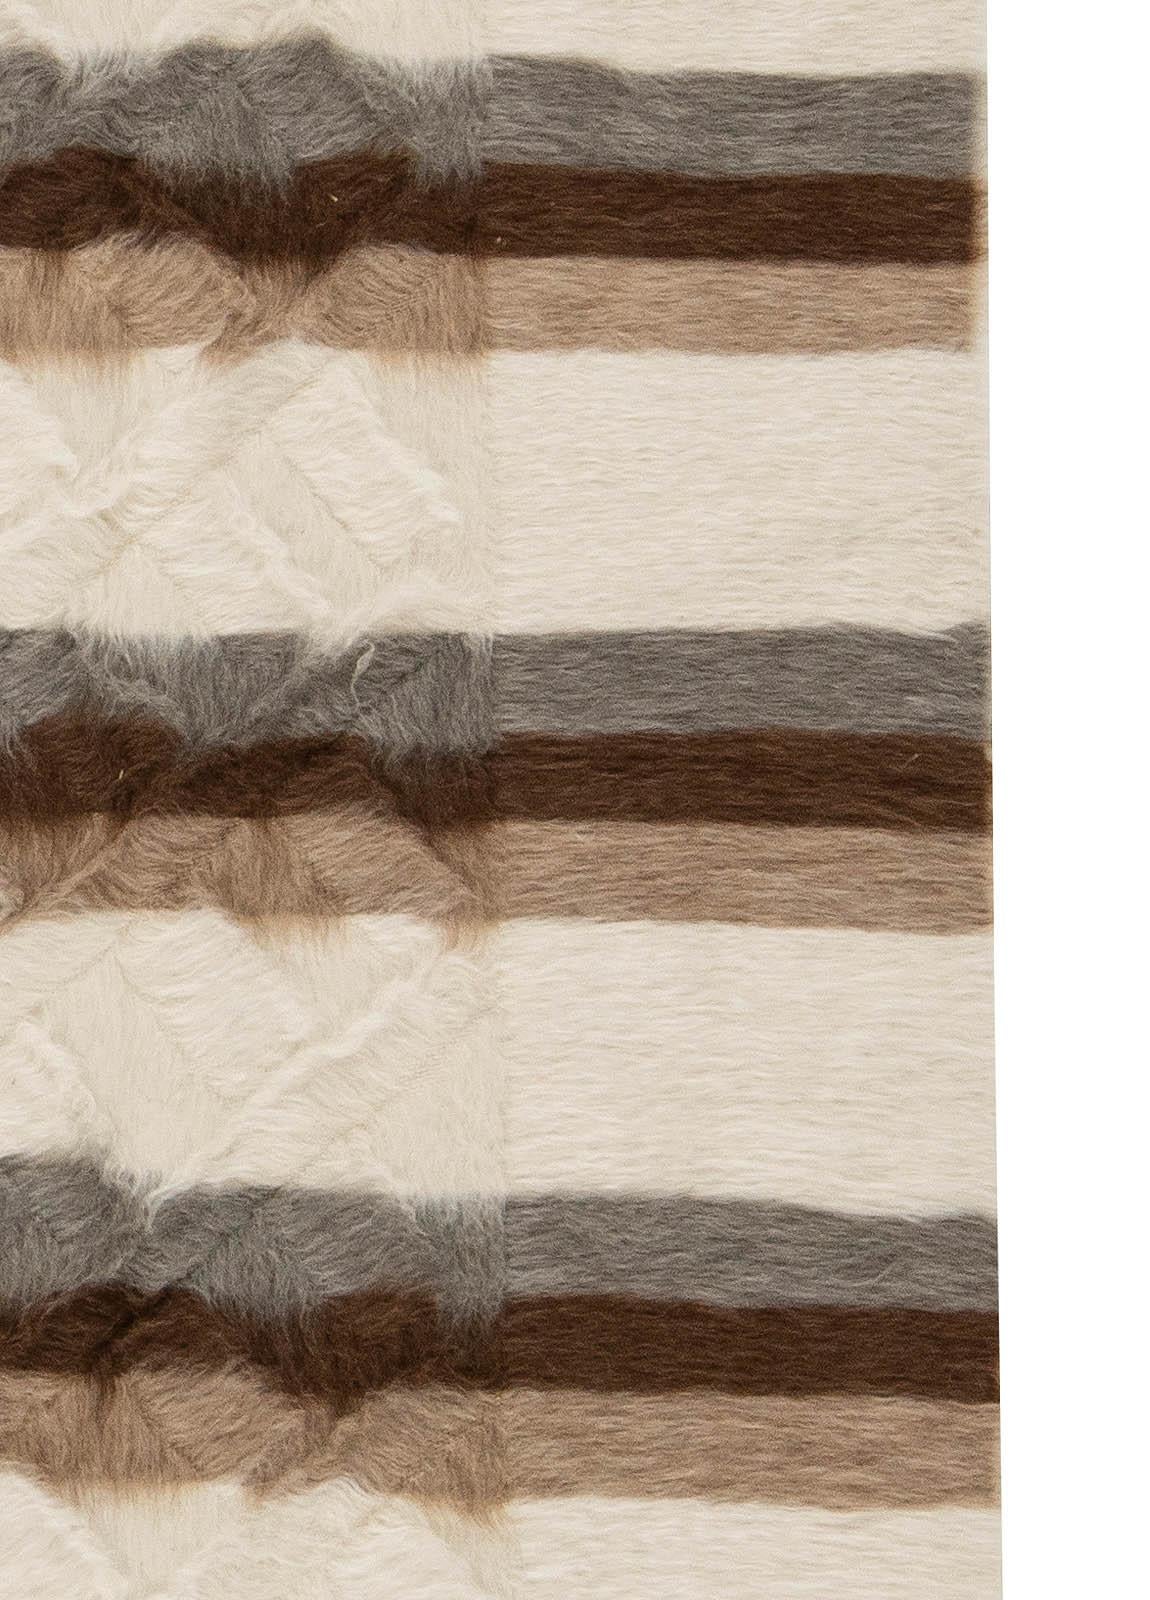 Hand-Knotted Taurus Collection Striped Goat Hair Rug by Doris Leslie Blau For Sale